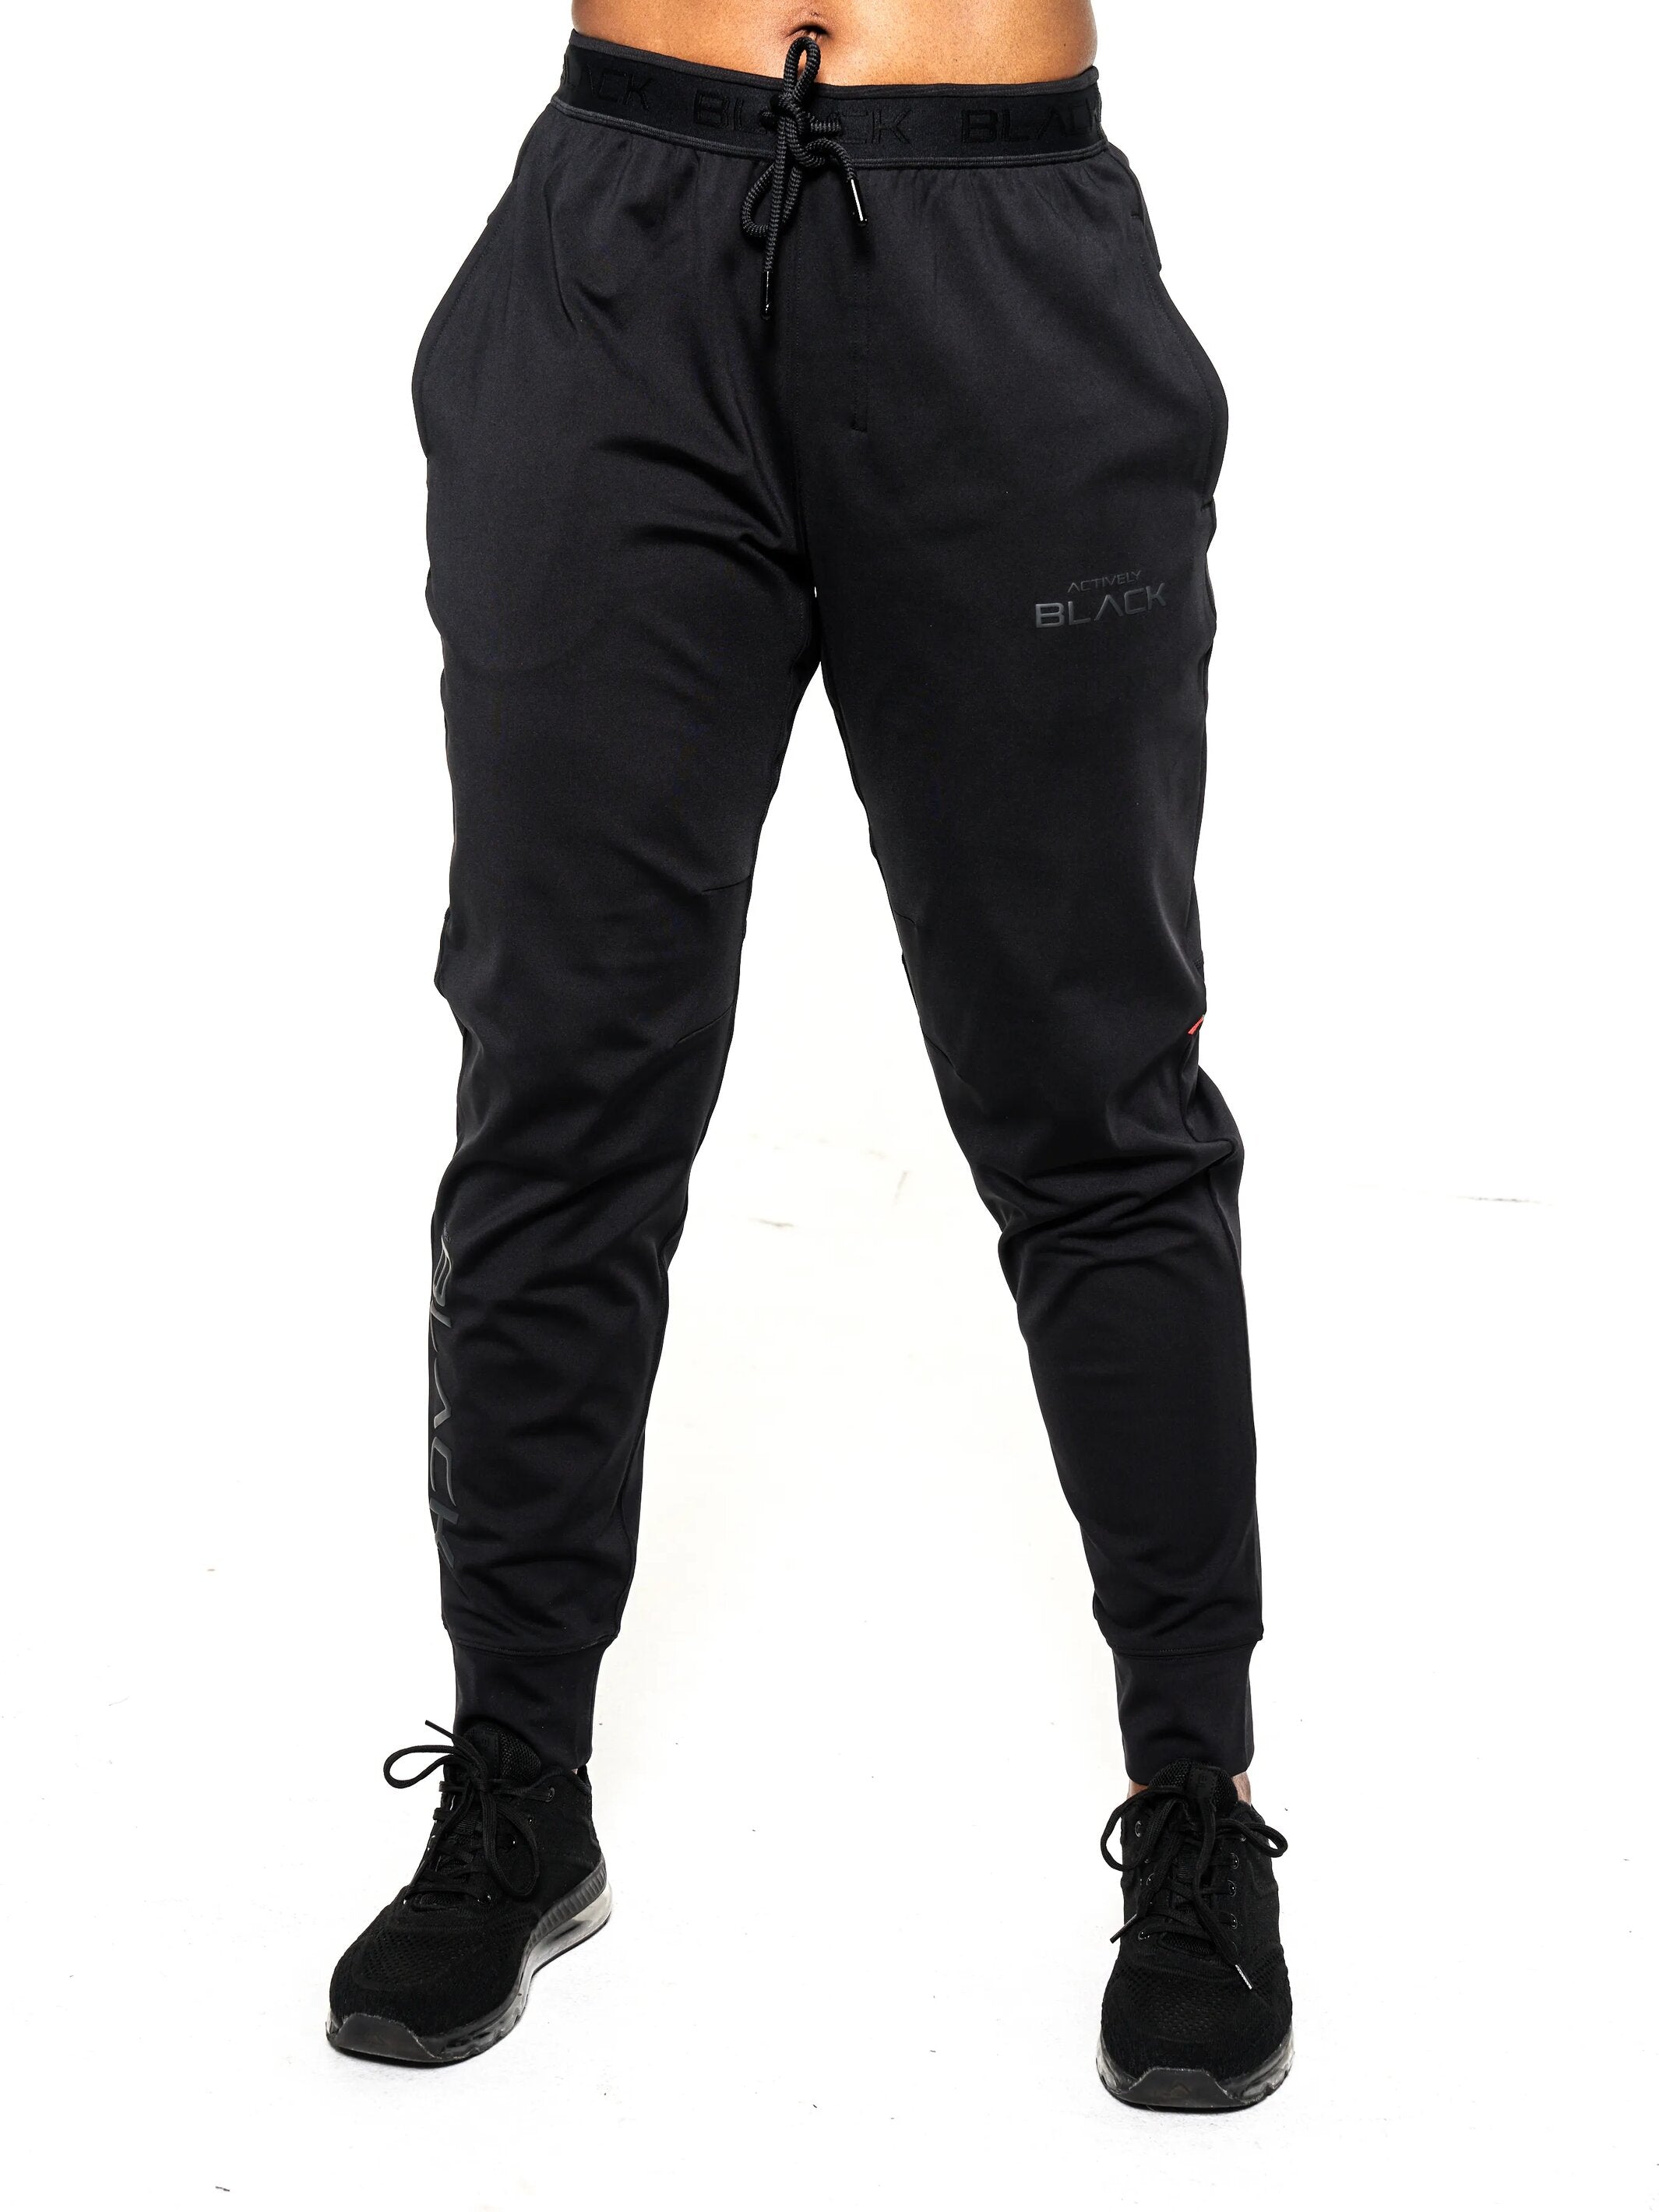 Women's Stealth Performance Joggers